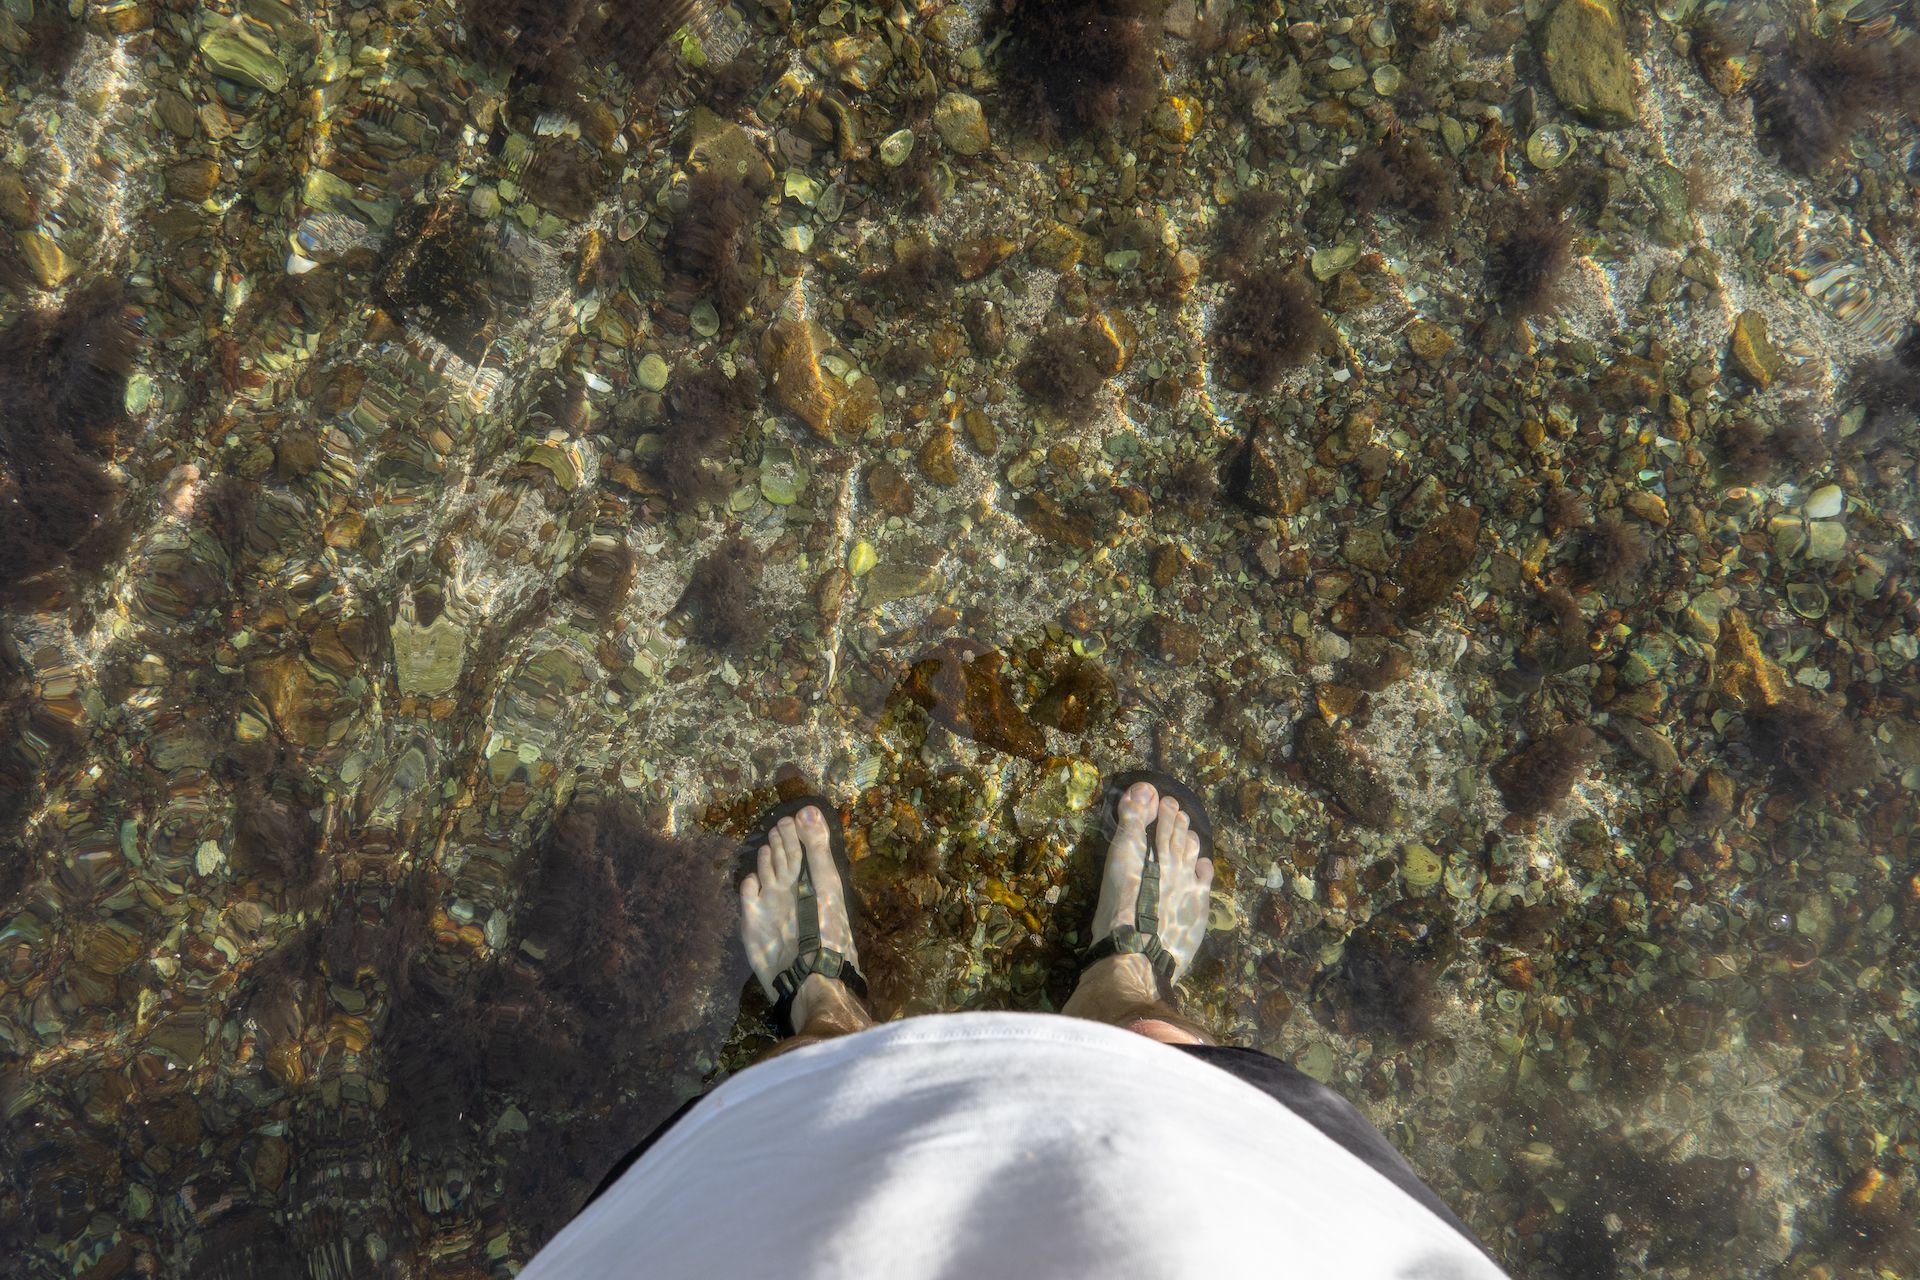 Clear, clear water